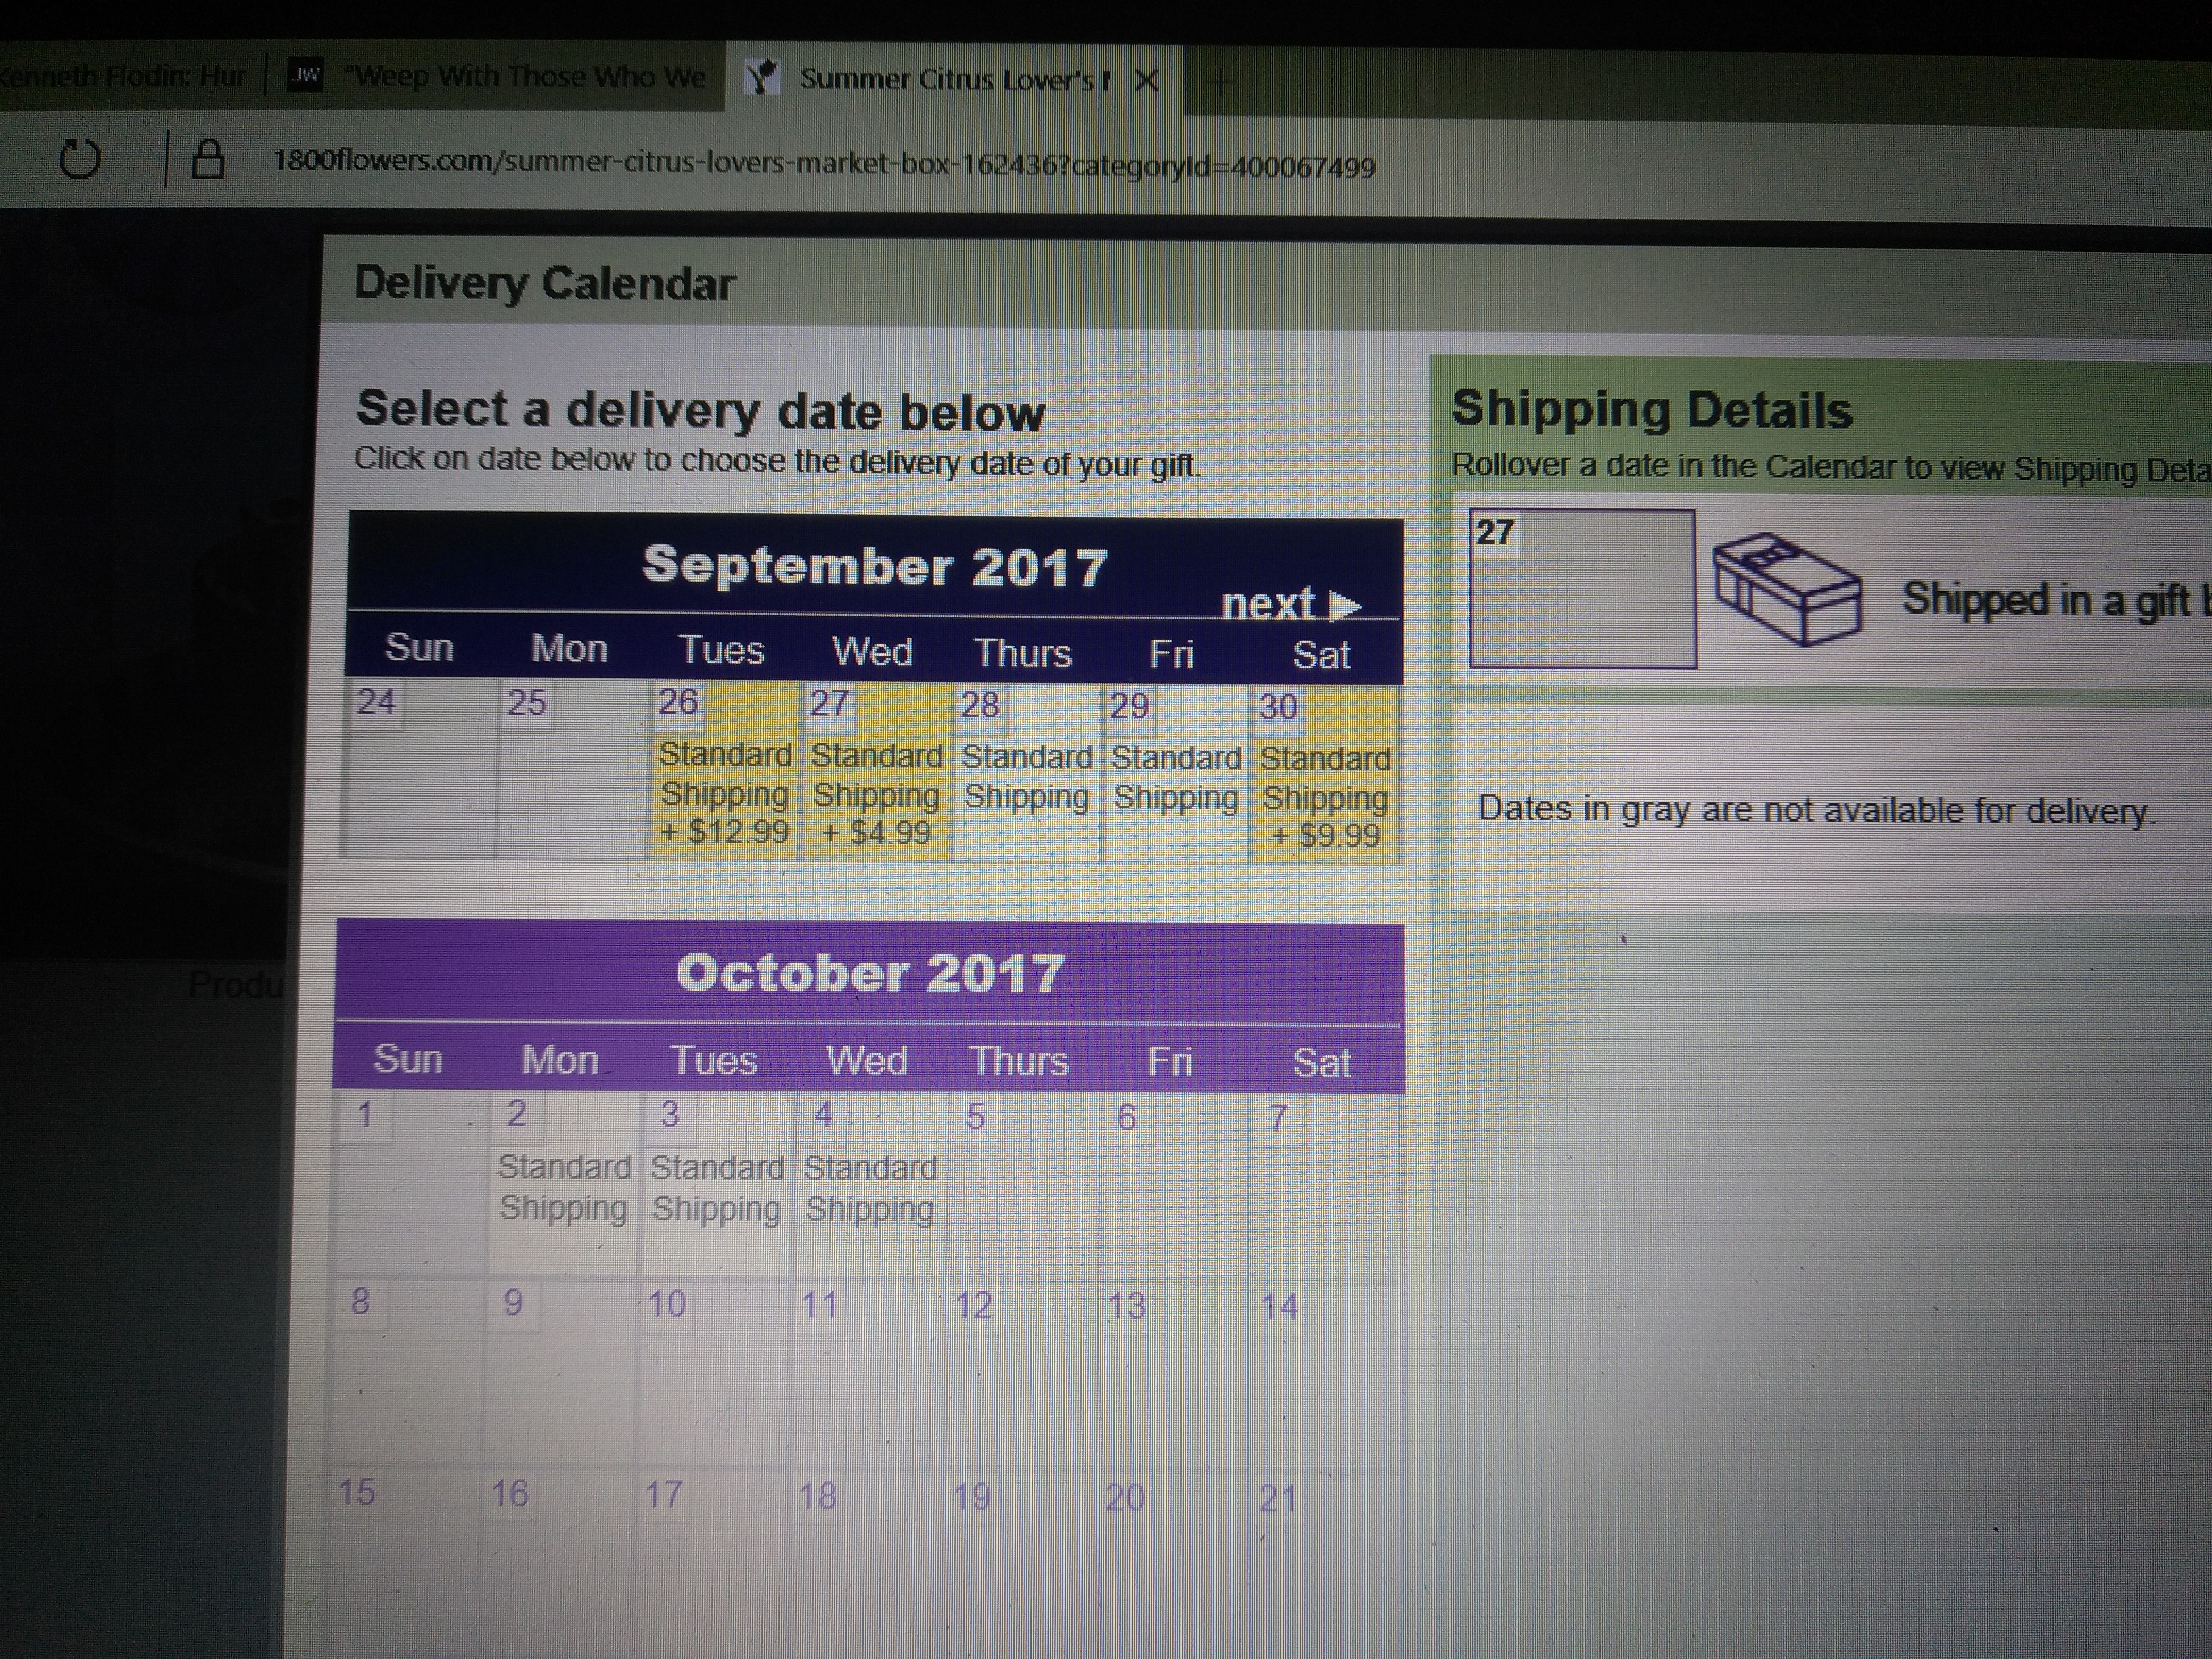 The actual fee I should have been charged, $4.99 for delivery on Wednesday, Sept. 27th.